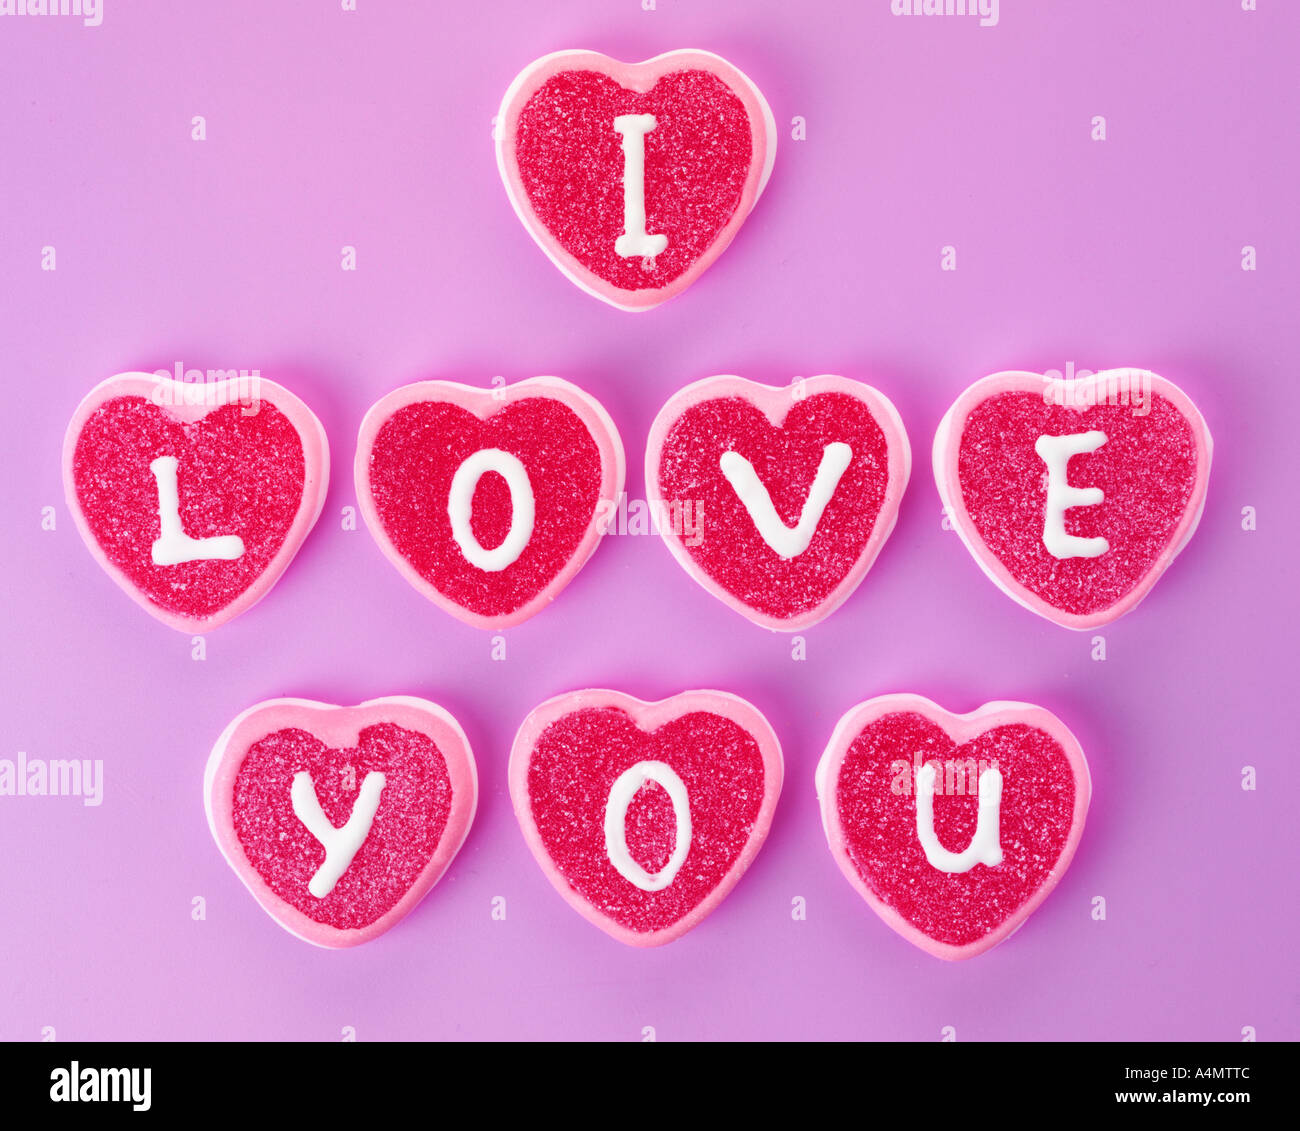 LOVE SWEETS / CANDY Stock Photo